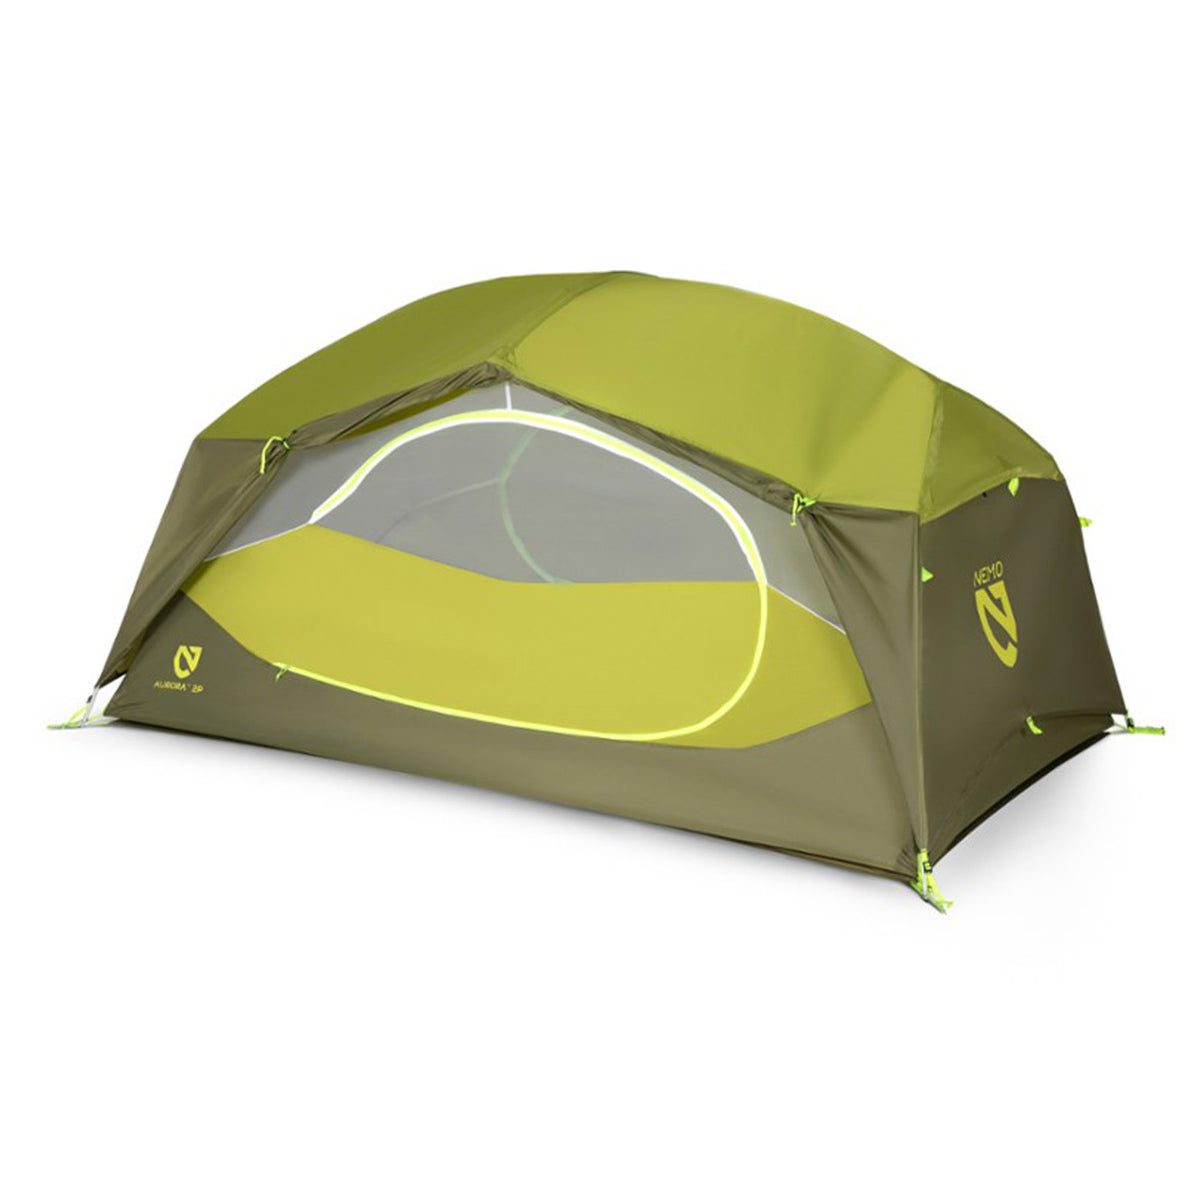 Hero image featuring the front of the Nemo Aurora 2 person tent in nova green with the footprint fully open